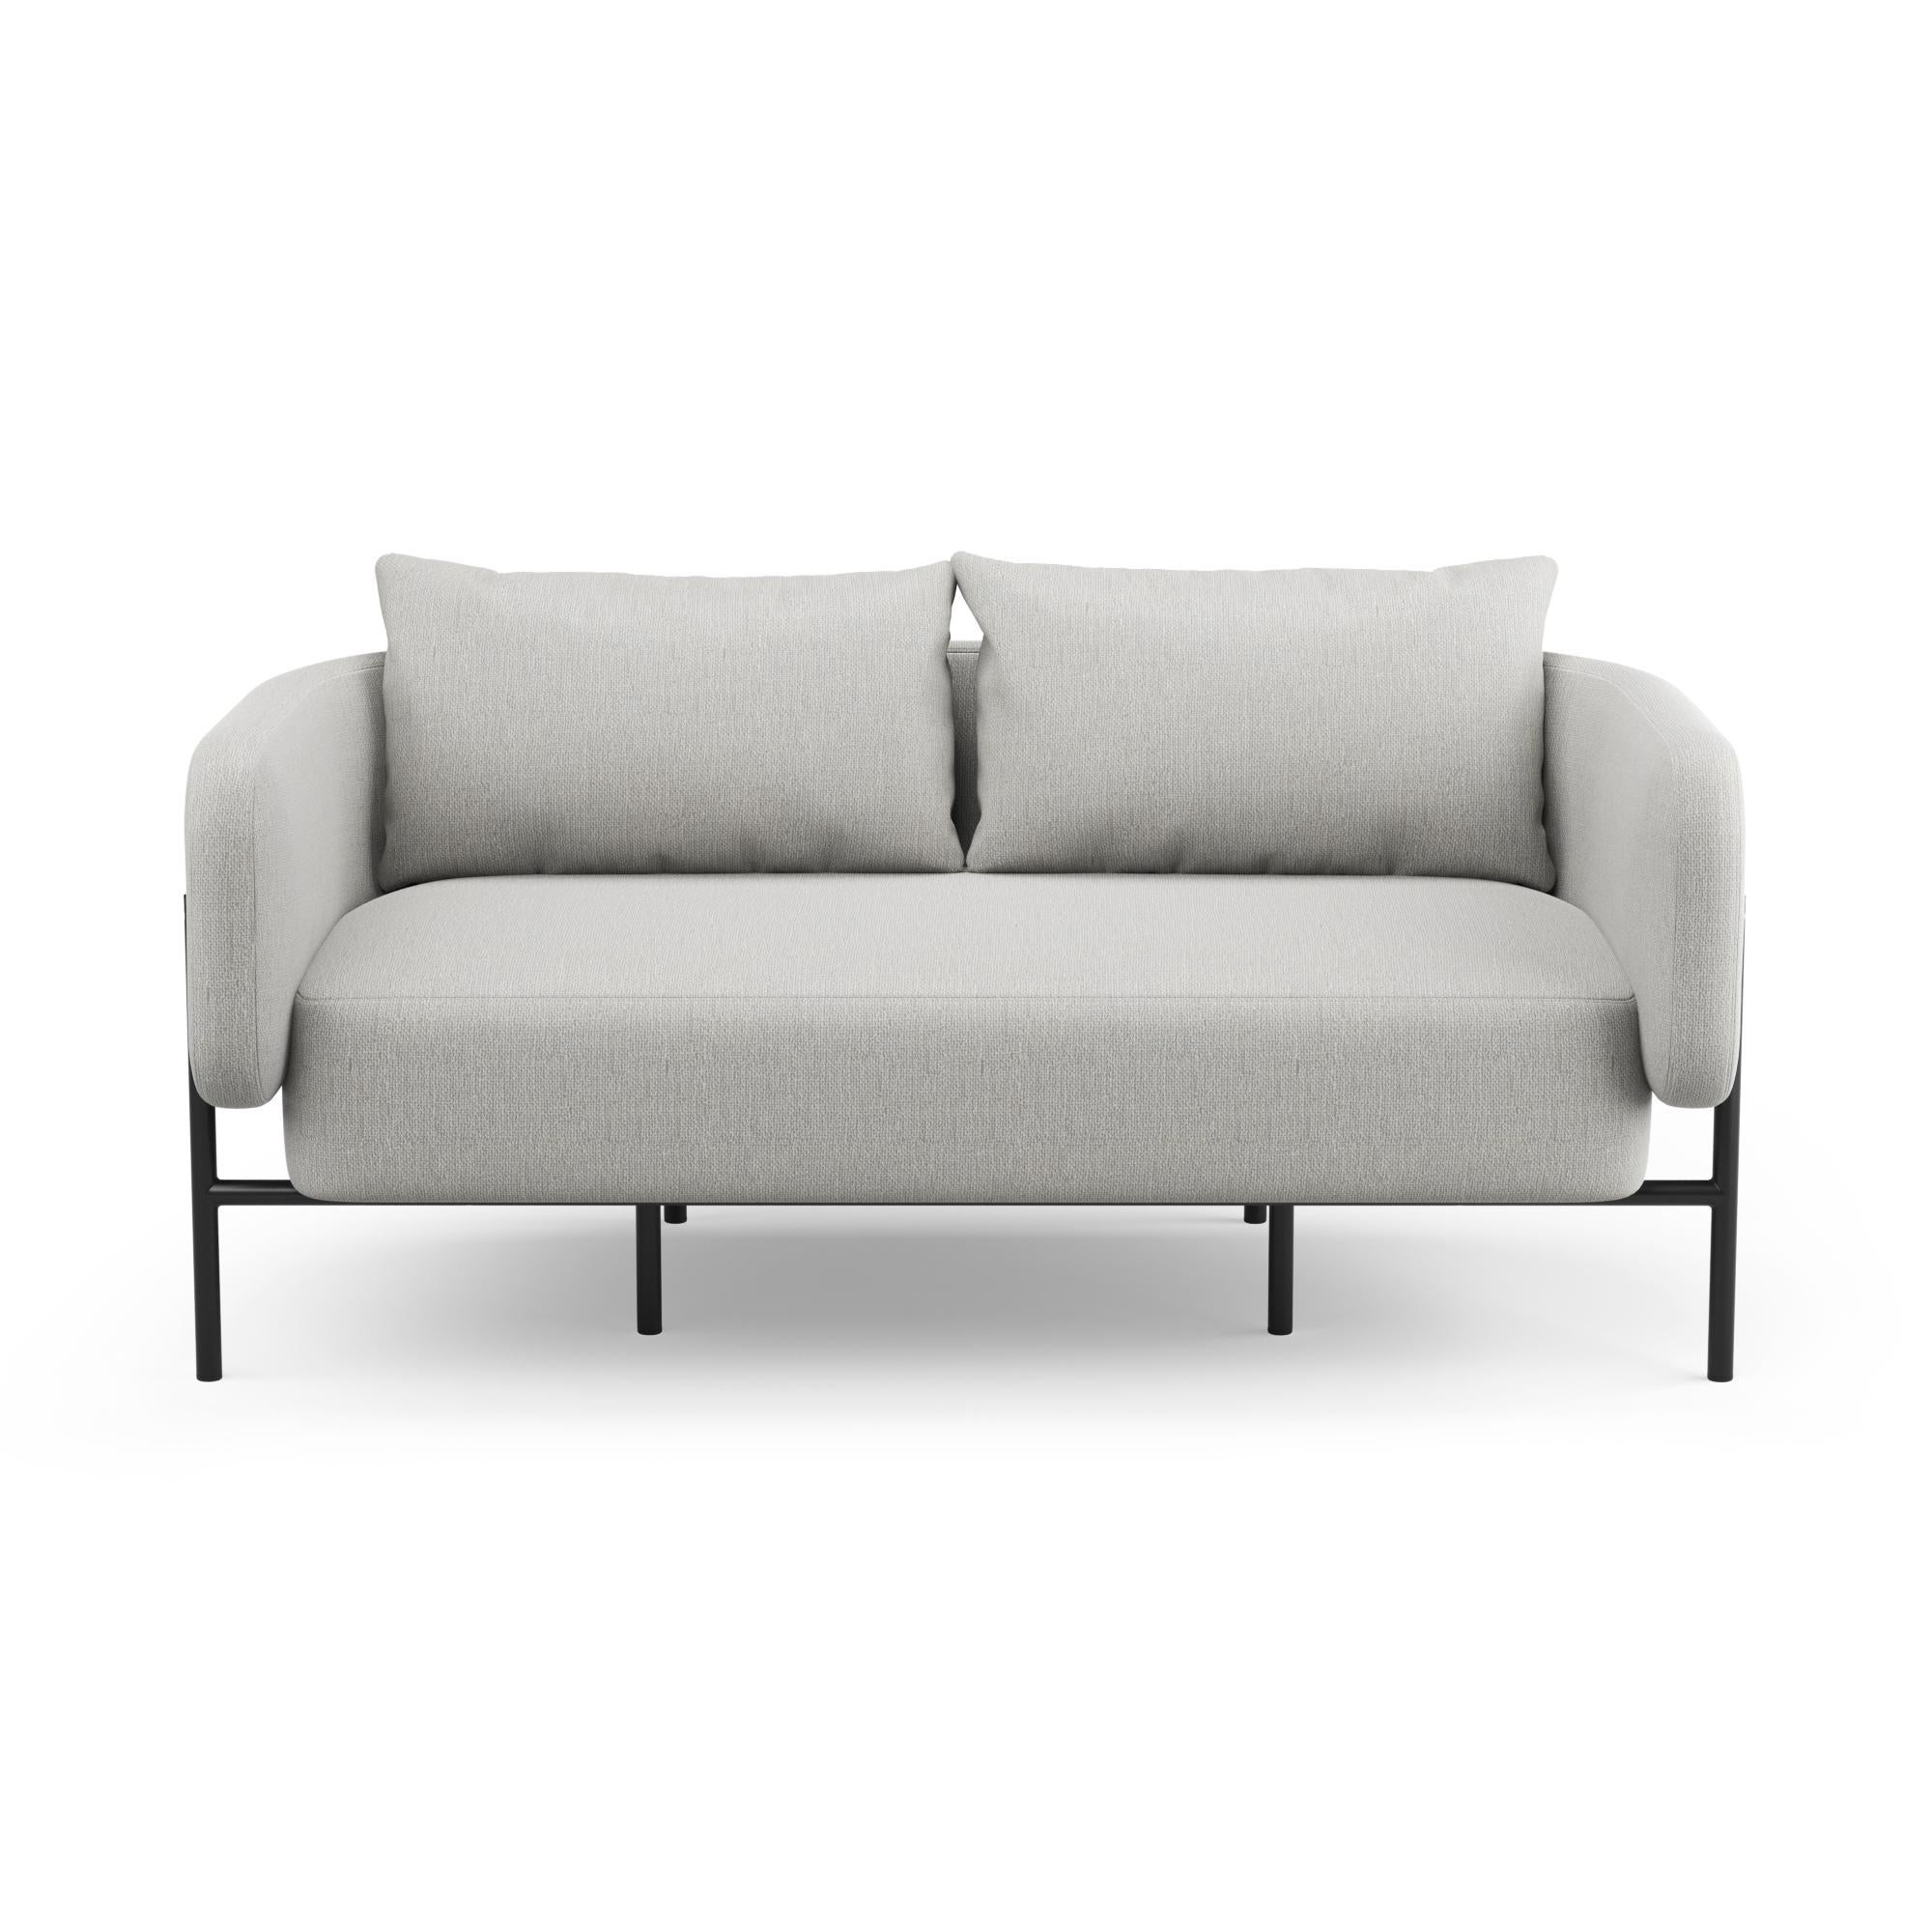 Modern Hayche Abrazo 2 Seater Sofa - Gravel, UK, Made to Order For Sale